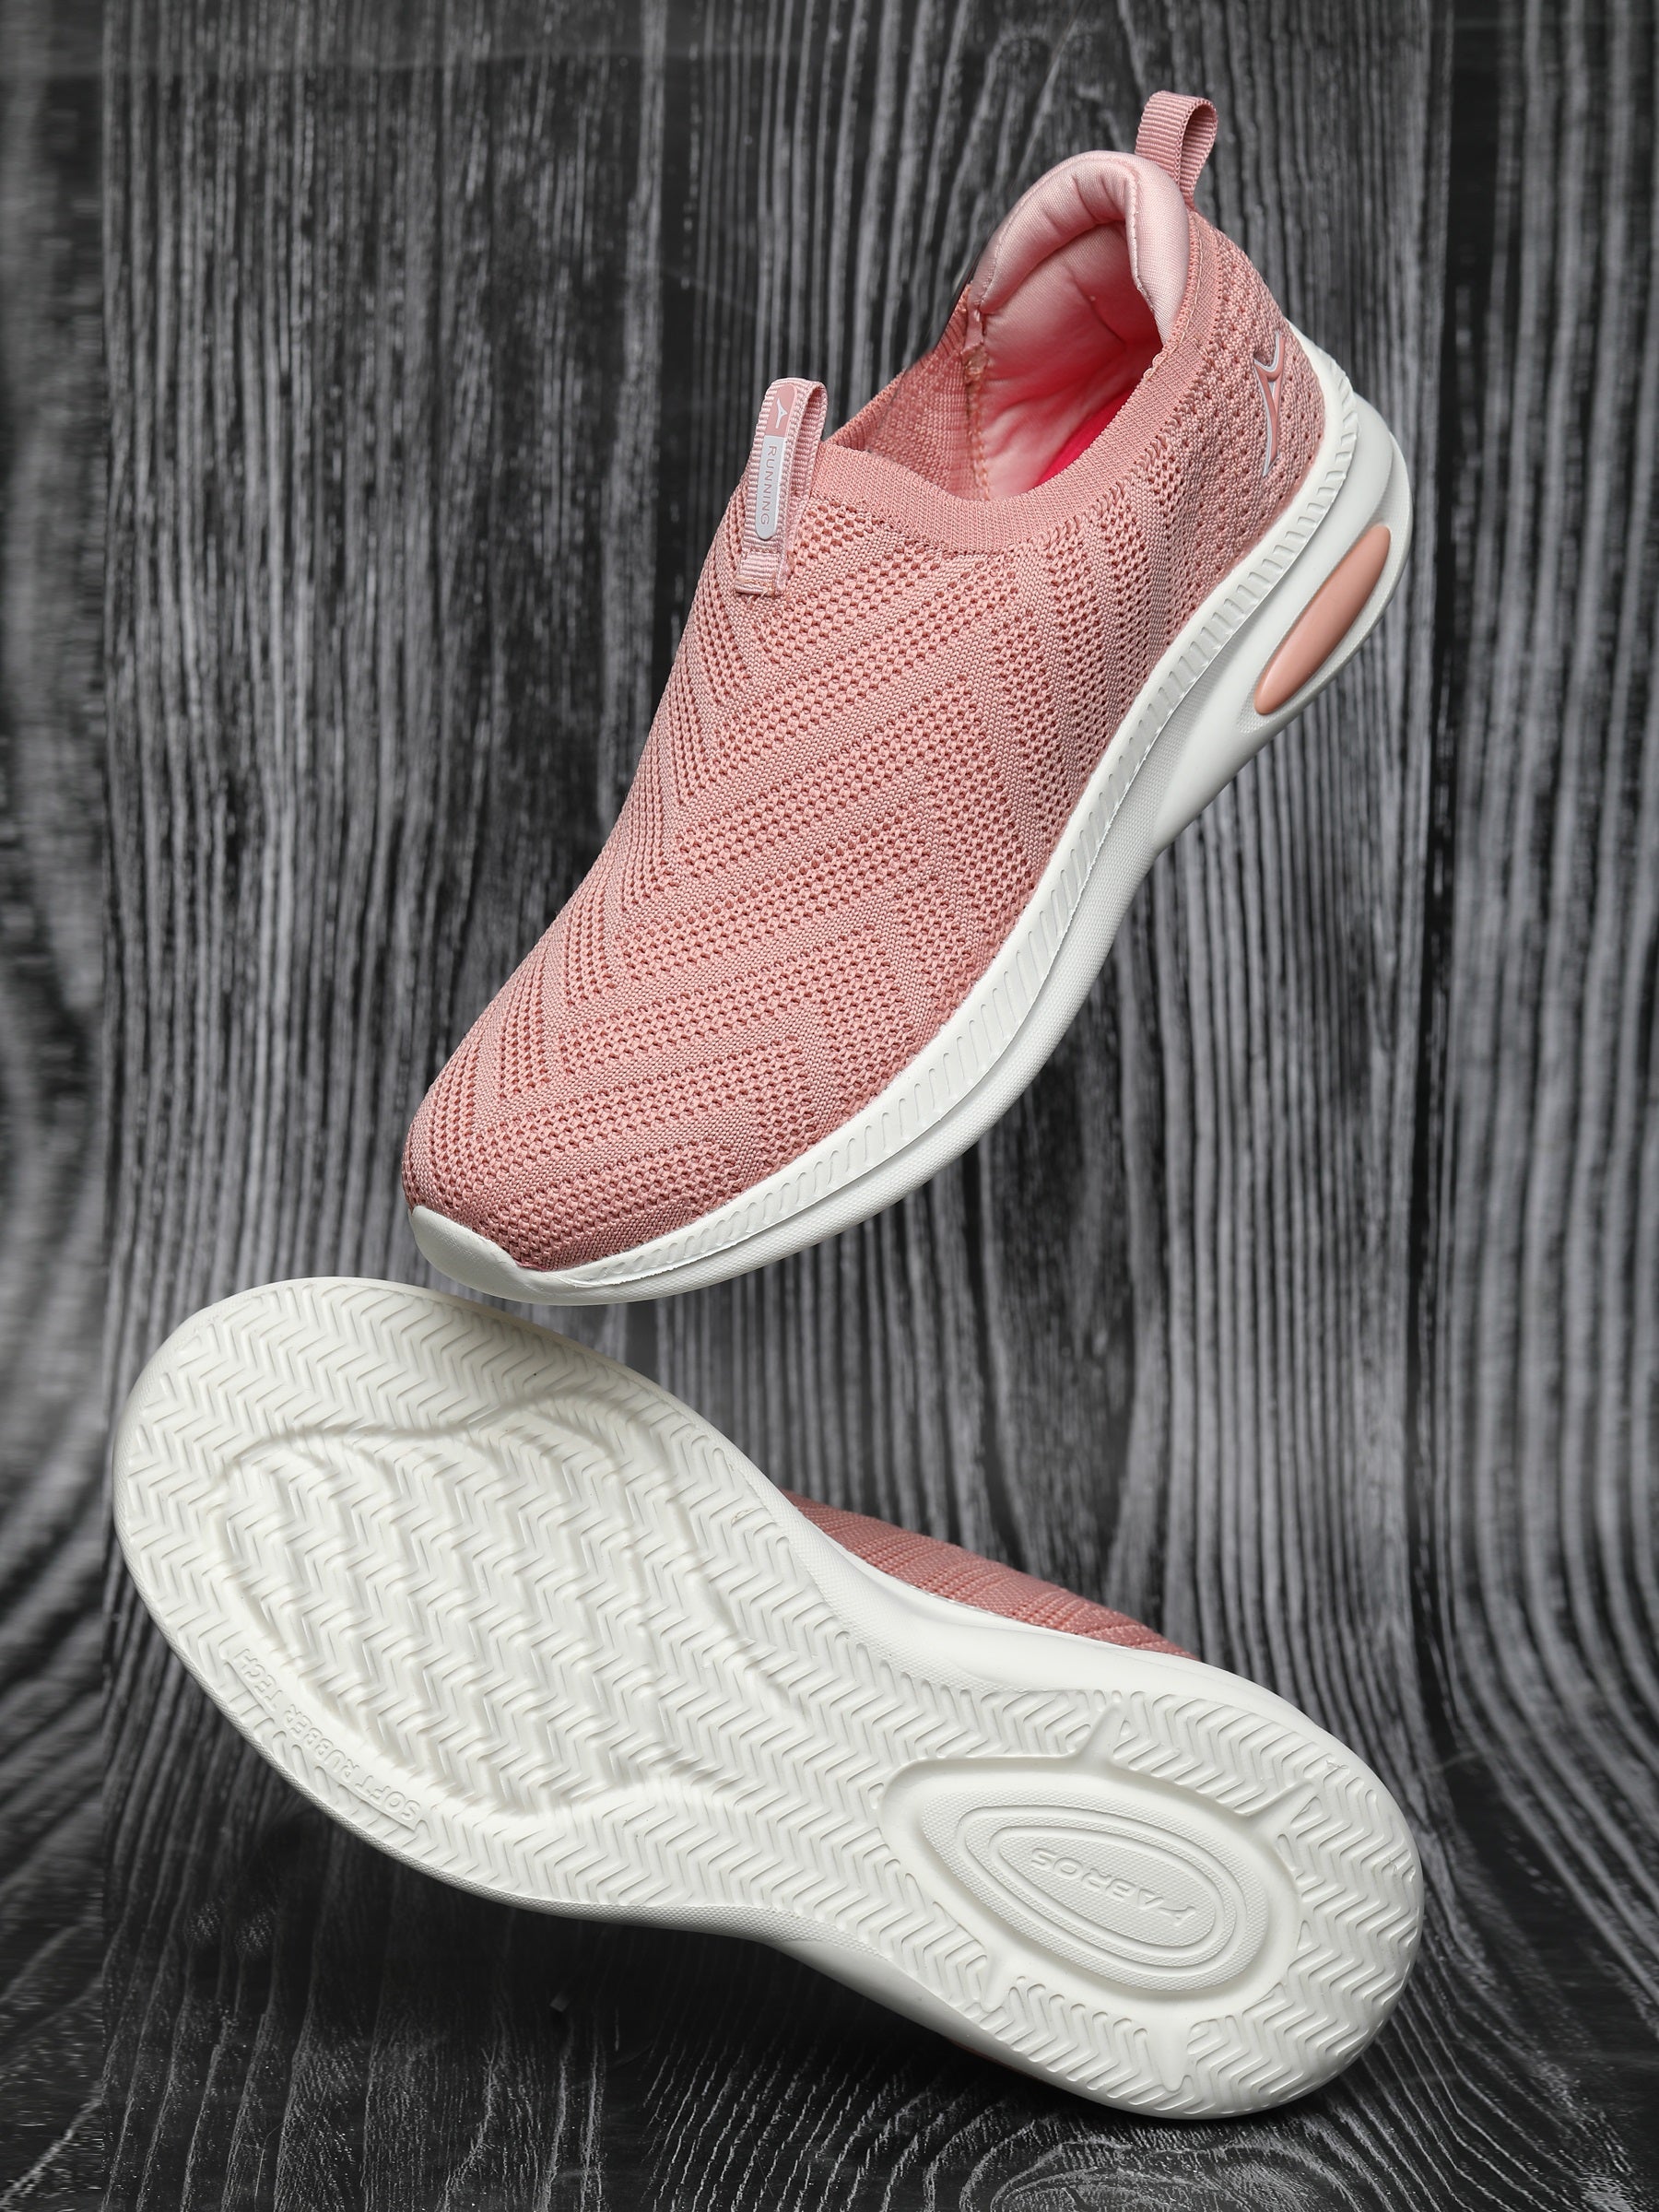 LOTUS SPORTS SHOES FOR WOMEN